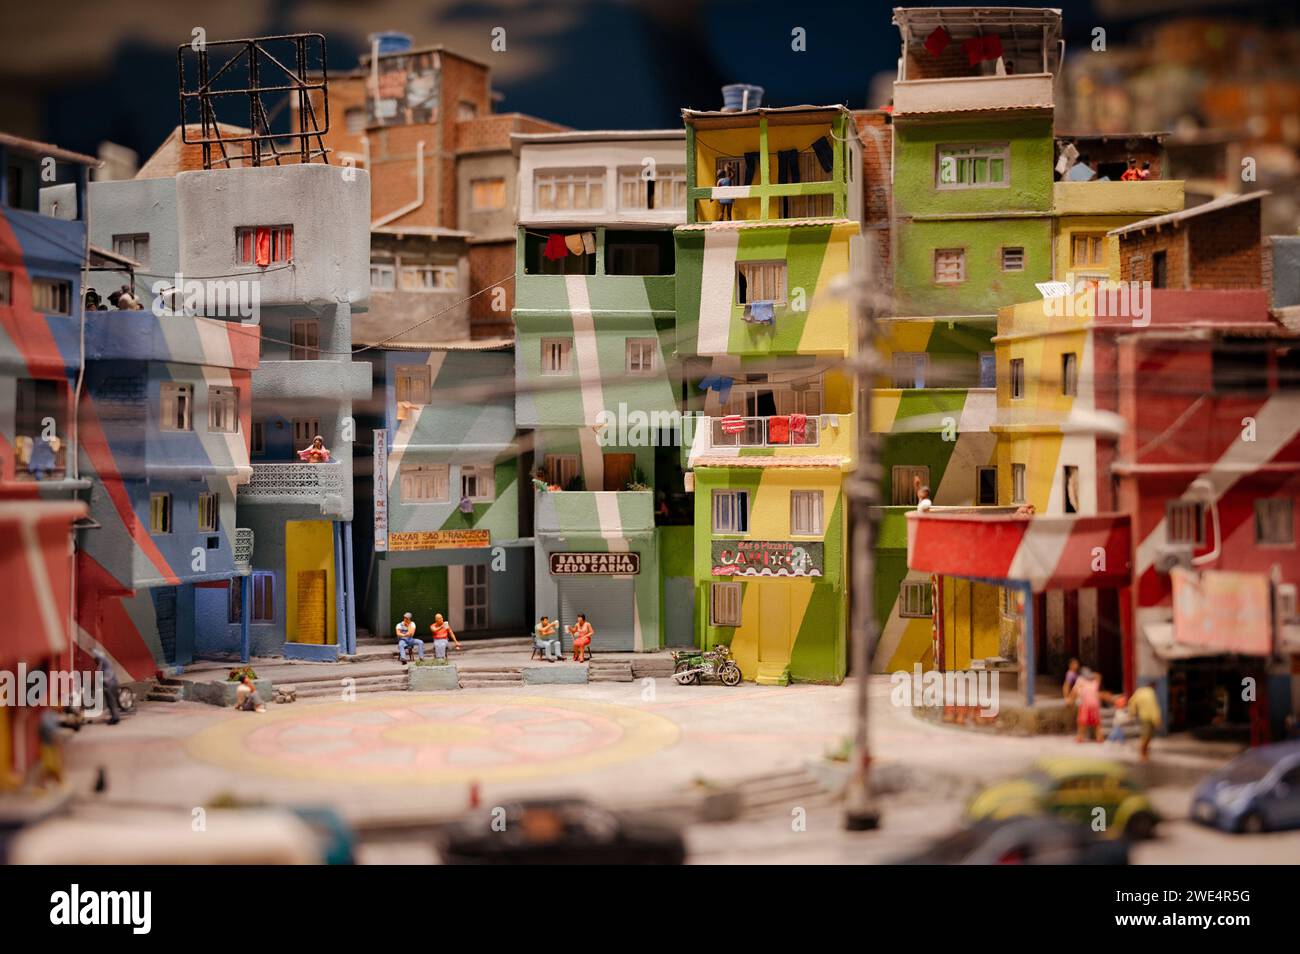 Miniatur Wunderland Hamburg in Germany, houses in Brazil, museum with miniature model construction of the world Stock Photo